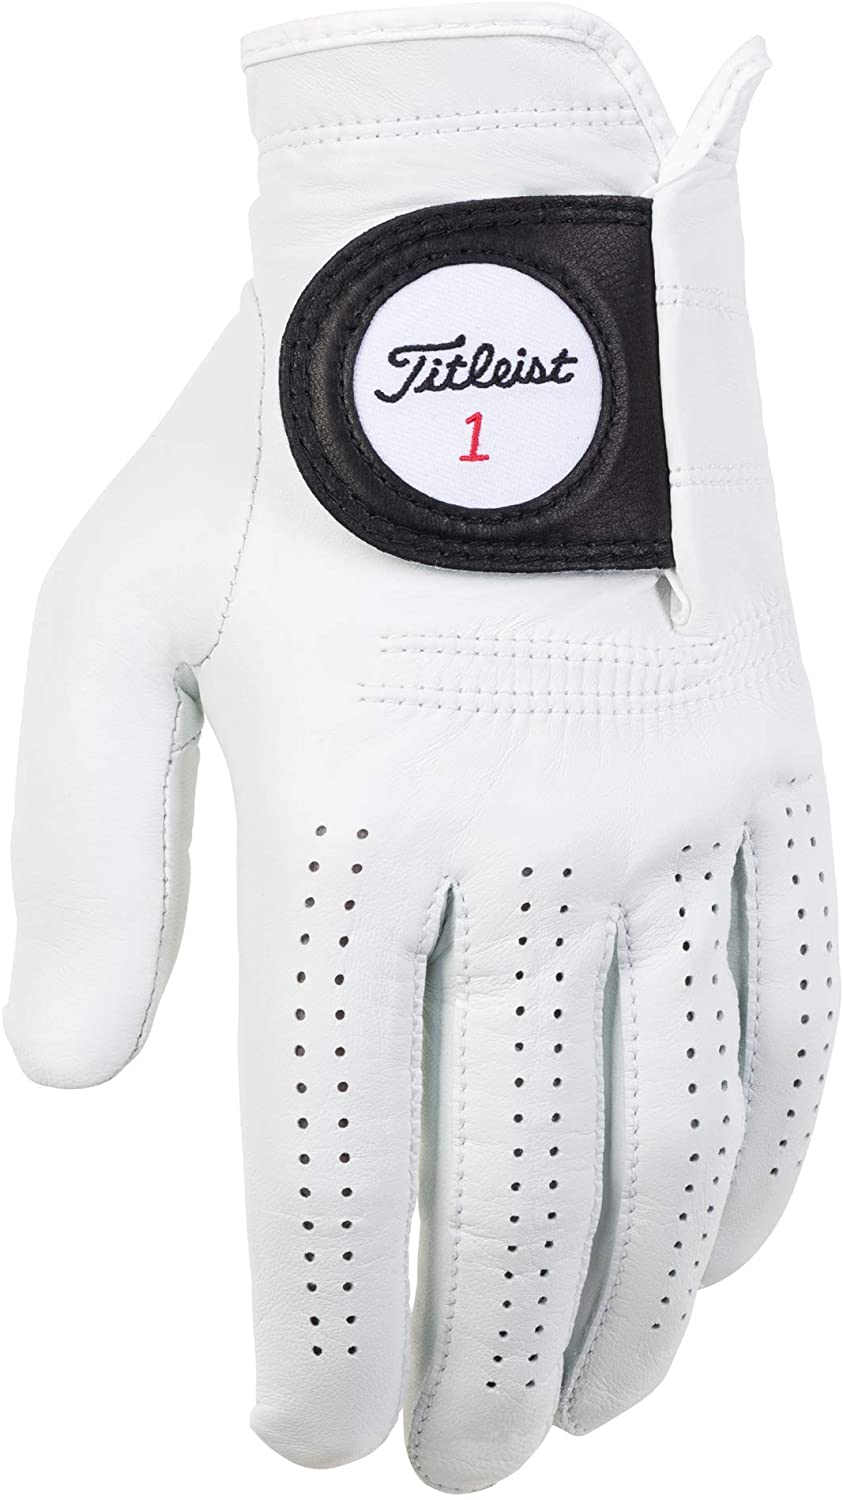 Titleist Players Men's Golf Glove Left X-Large (worn on left hand) - image 1 of 4